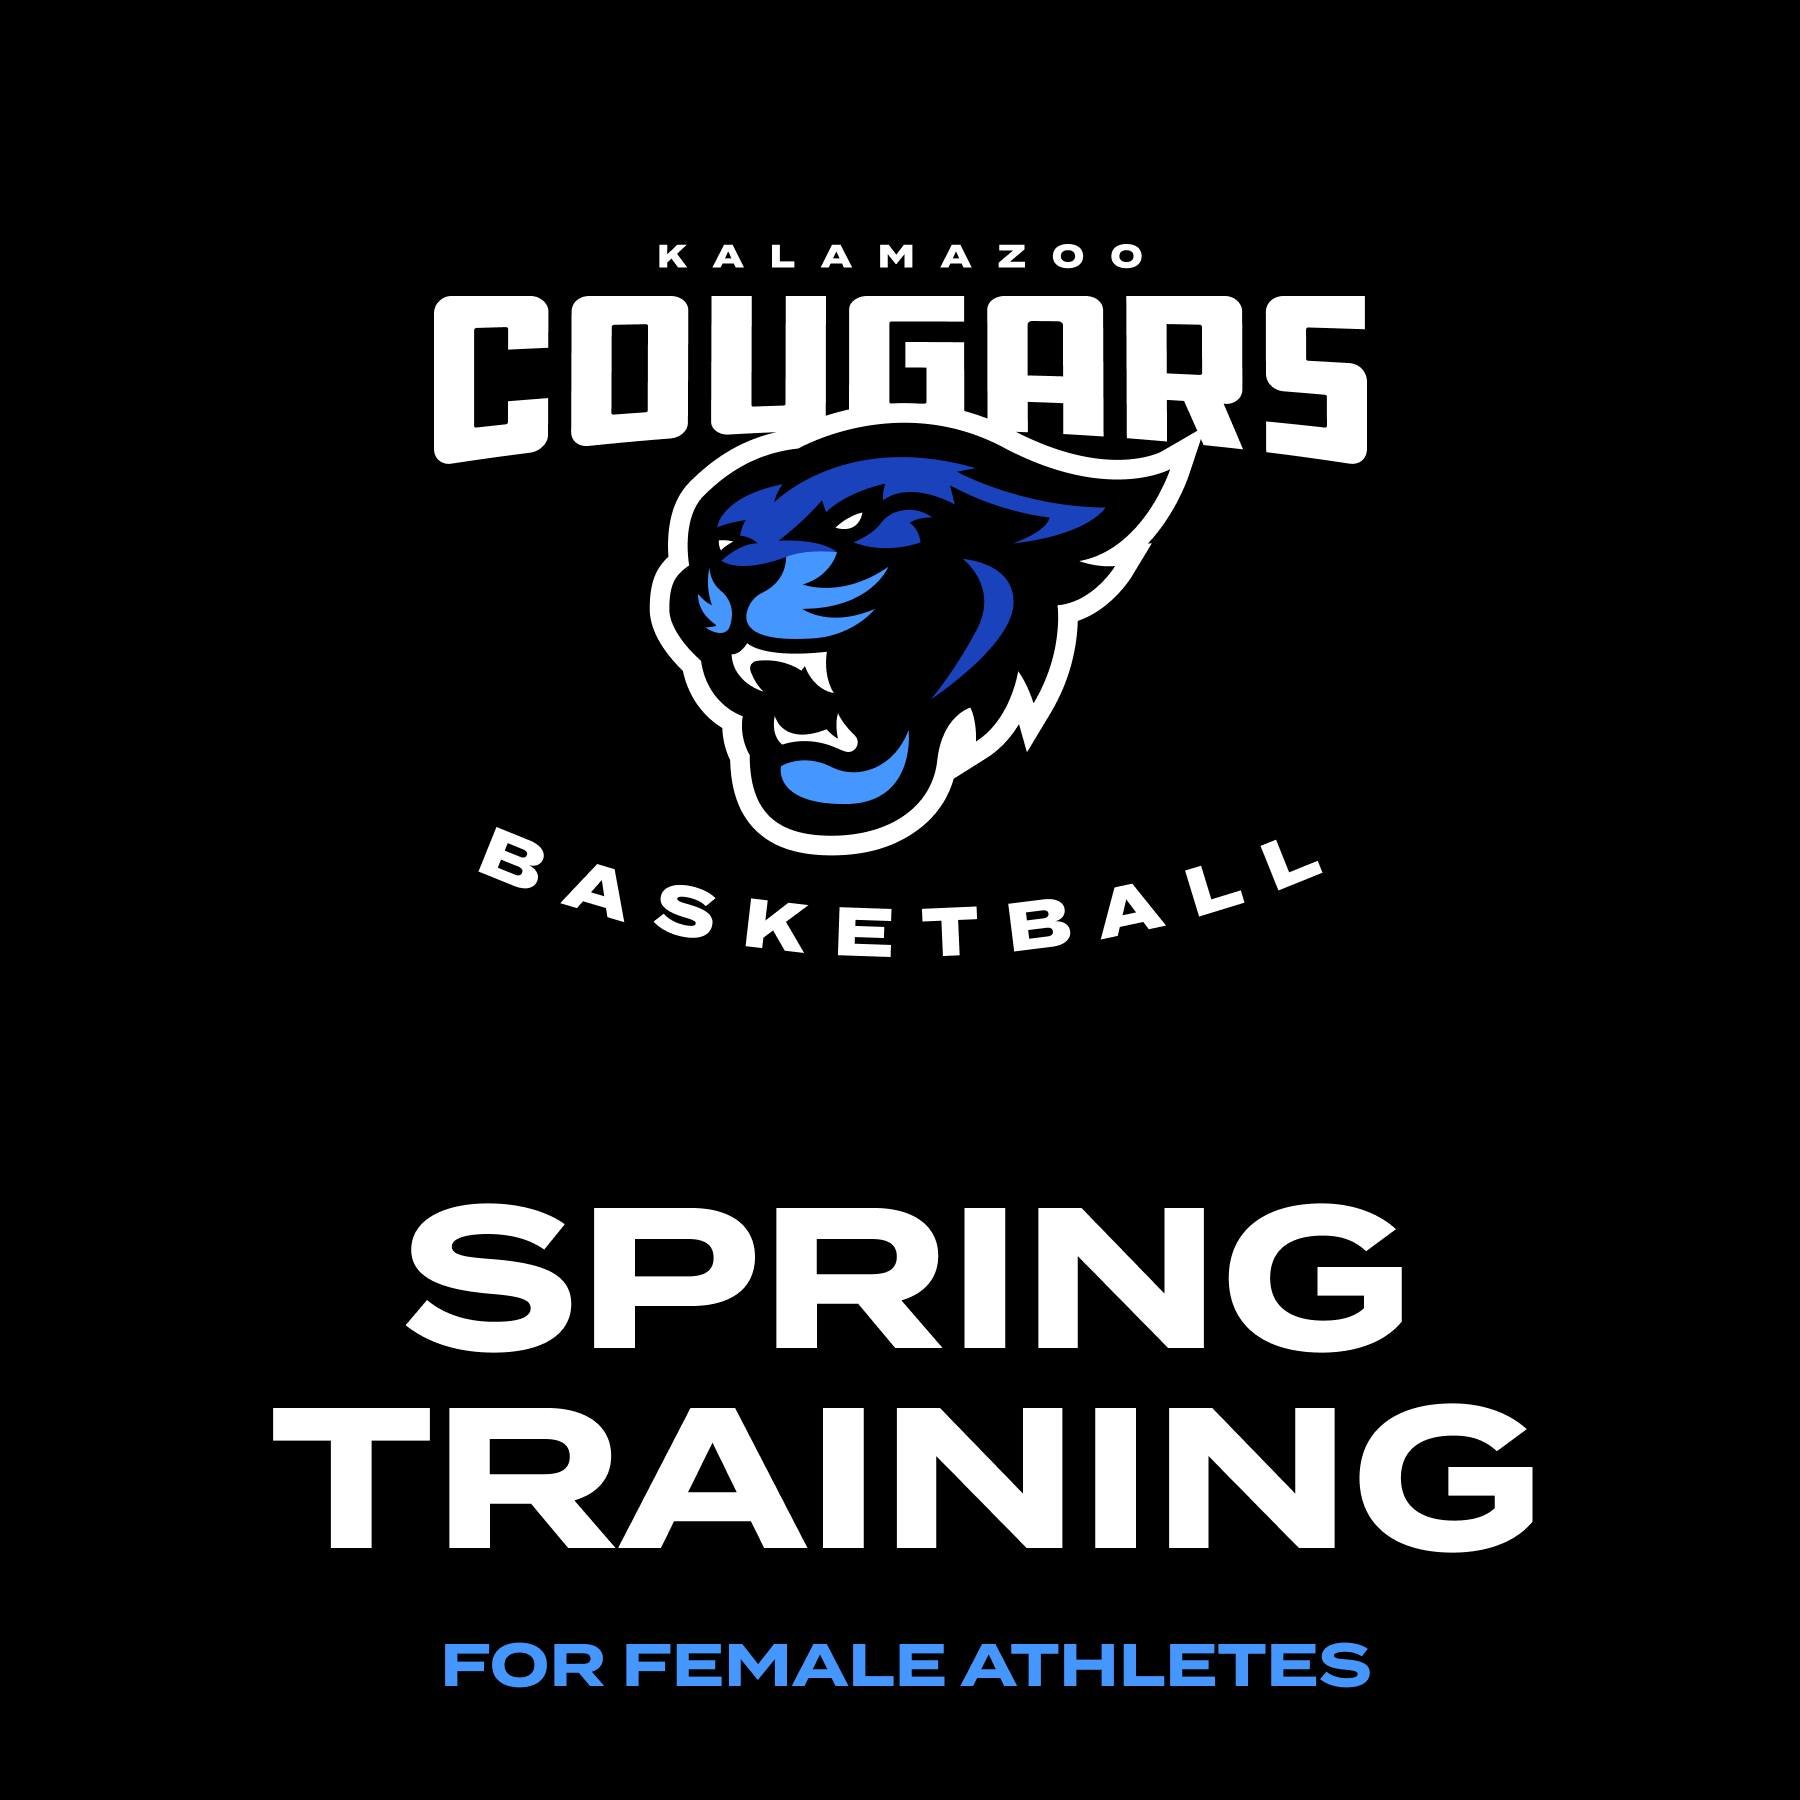 SPRING TRAINING OPPORTUNITY

Jim Bellware is hosting a spring training opportunity for 10 through 14 year-old girls basketball. The dates and locations are below:

4/12 (3:00 to 5:00 p.m.)
4/19 (3:00 to 5:00 p.m.)
4/26 (3:00 to 5:00 p.m.)
5/3 (3:00 t